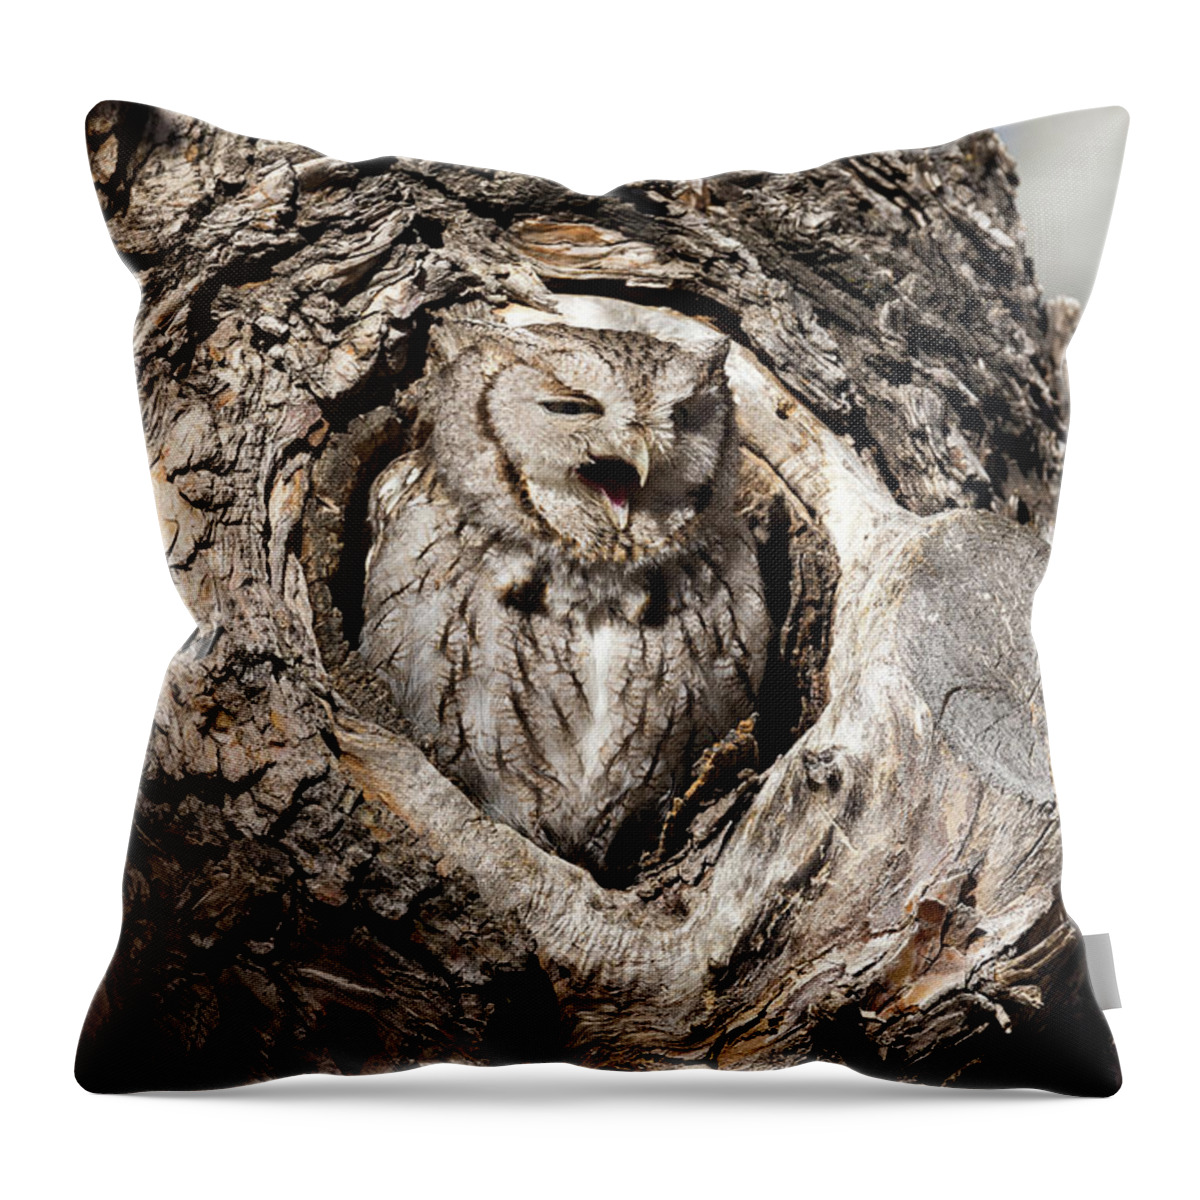 Owl Throw Pillow featuring the photograph Eastern Screech Owl Makes Some Noise by Tony Hake